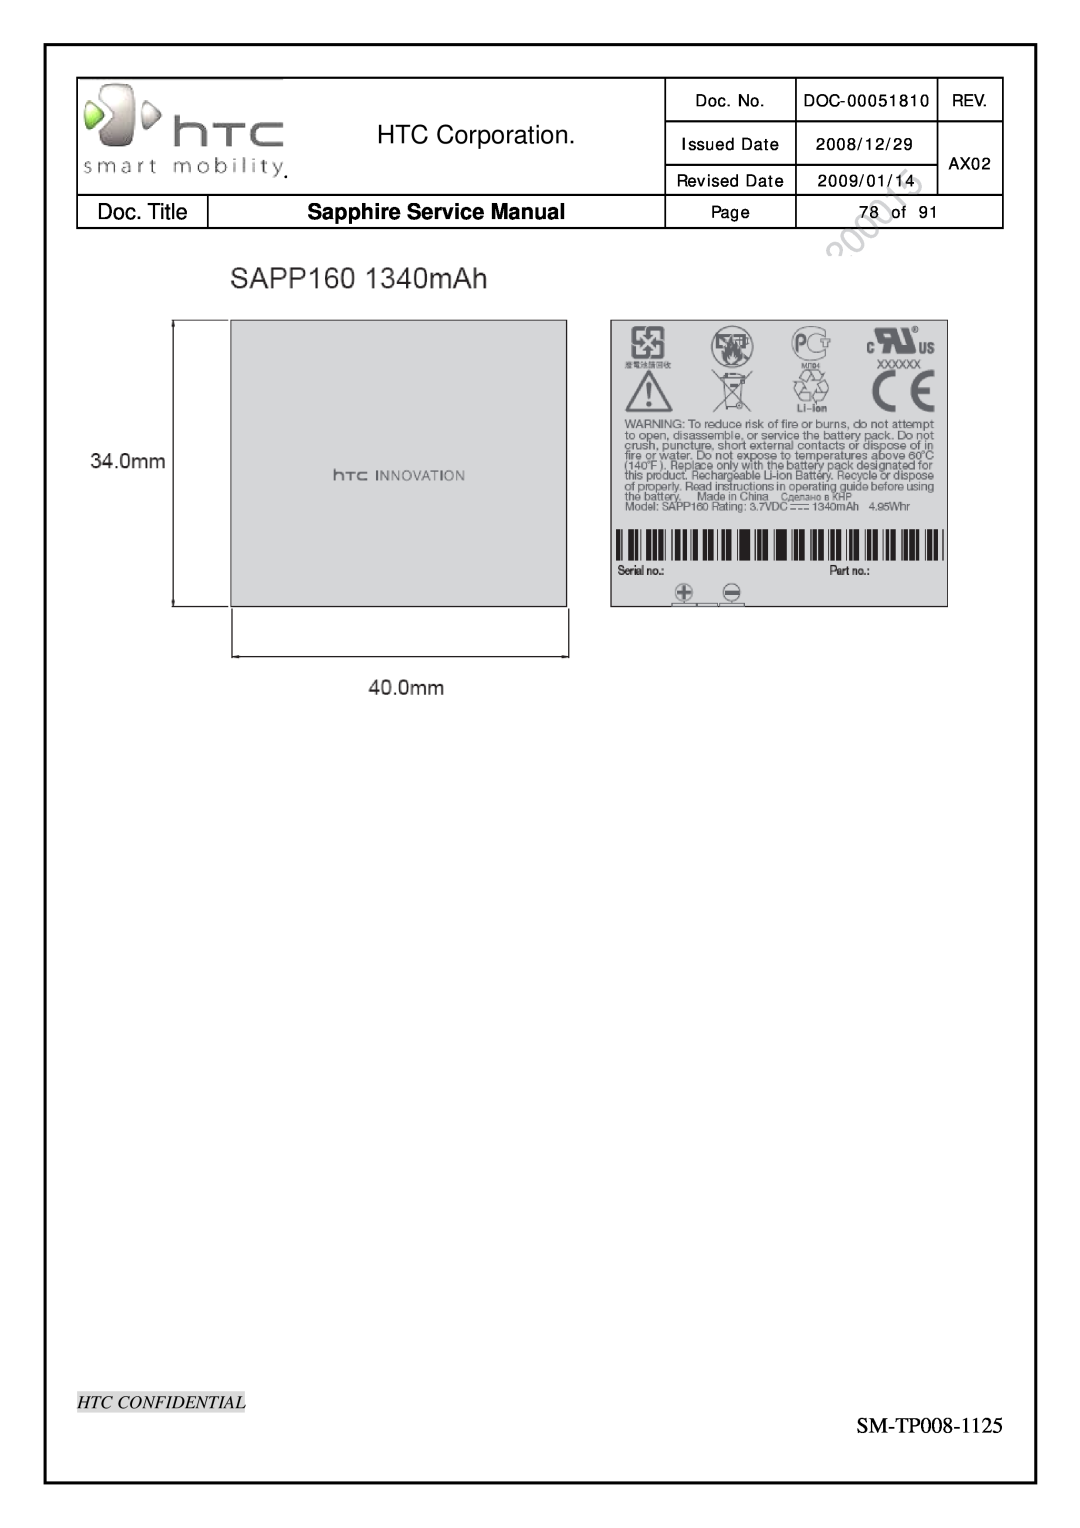 HTC SM-TP008-1125 HTC Corporation, Sapphire Service Manual, Htc Confidential, Doc. No, DOC-00051810, 78 of, Issued Date 